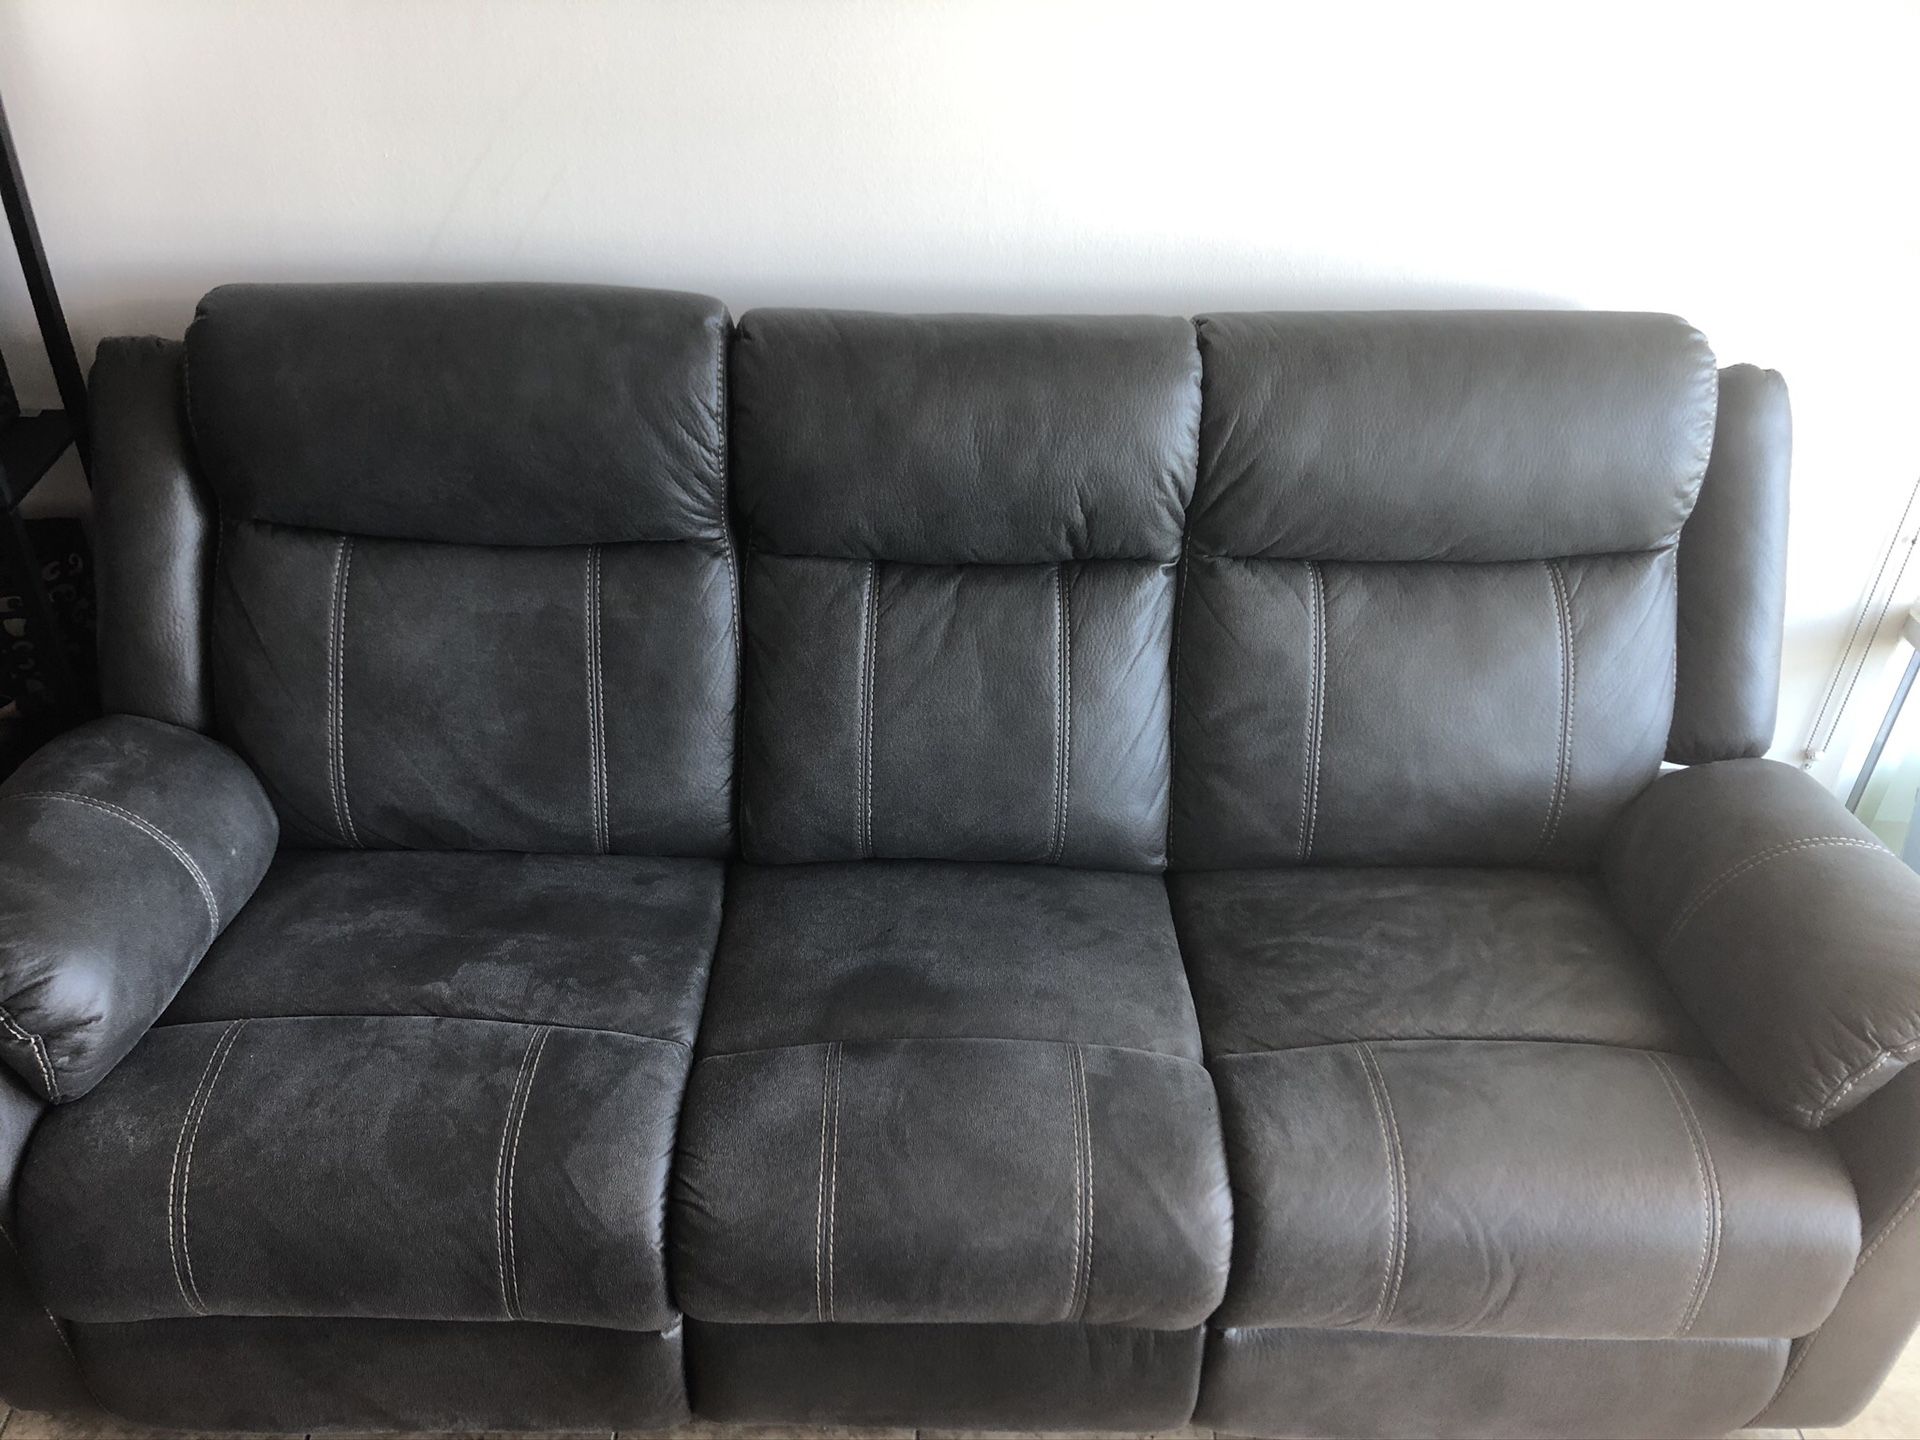 Recliner sofa and Love seat from Jeromes